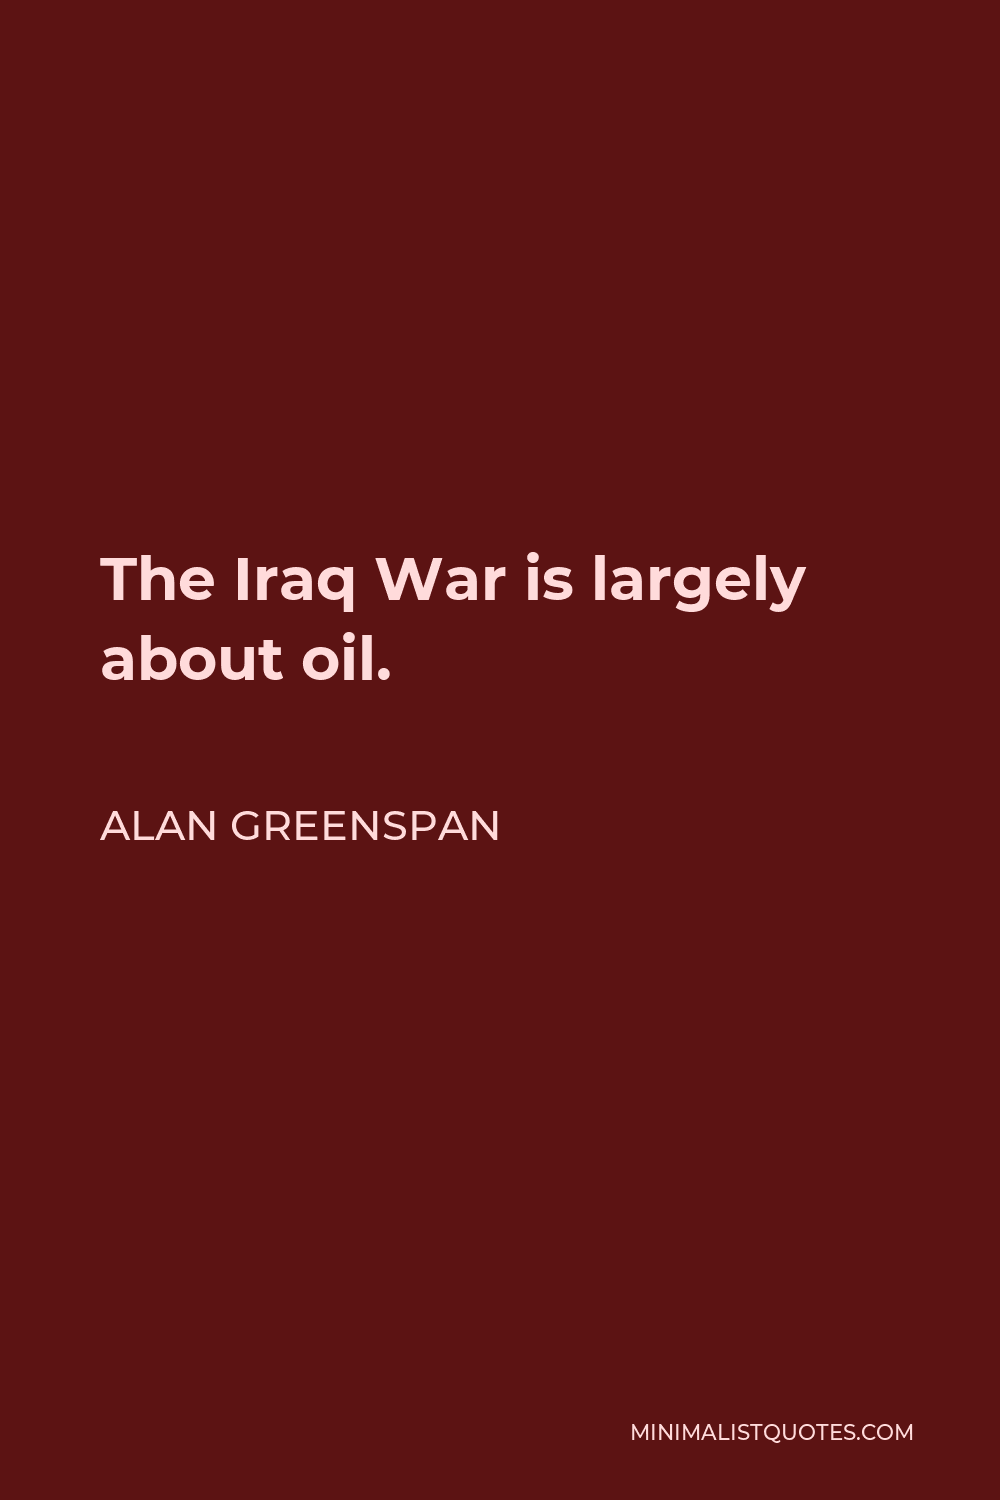 Alan Greenspan Quote - The Iraq War is largely about oil.